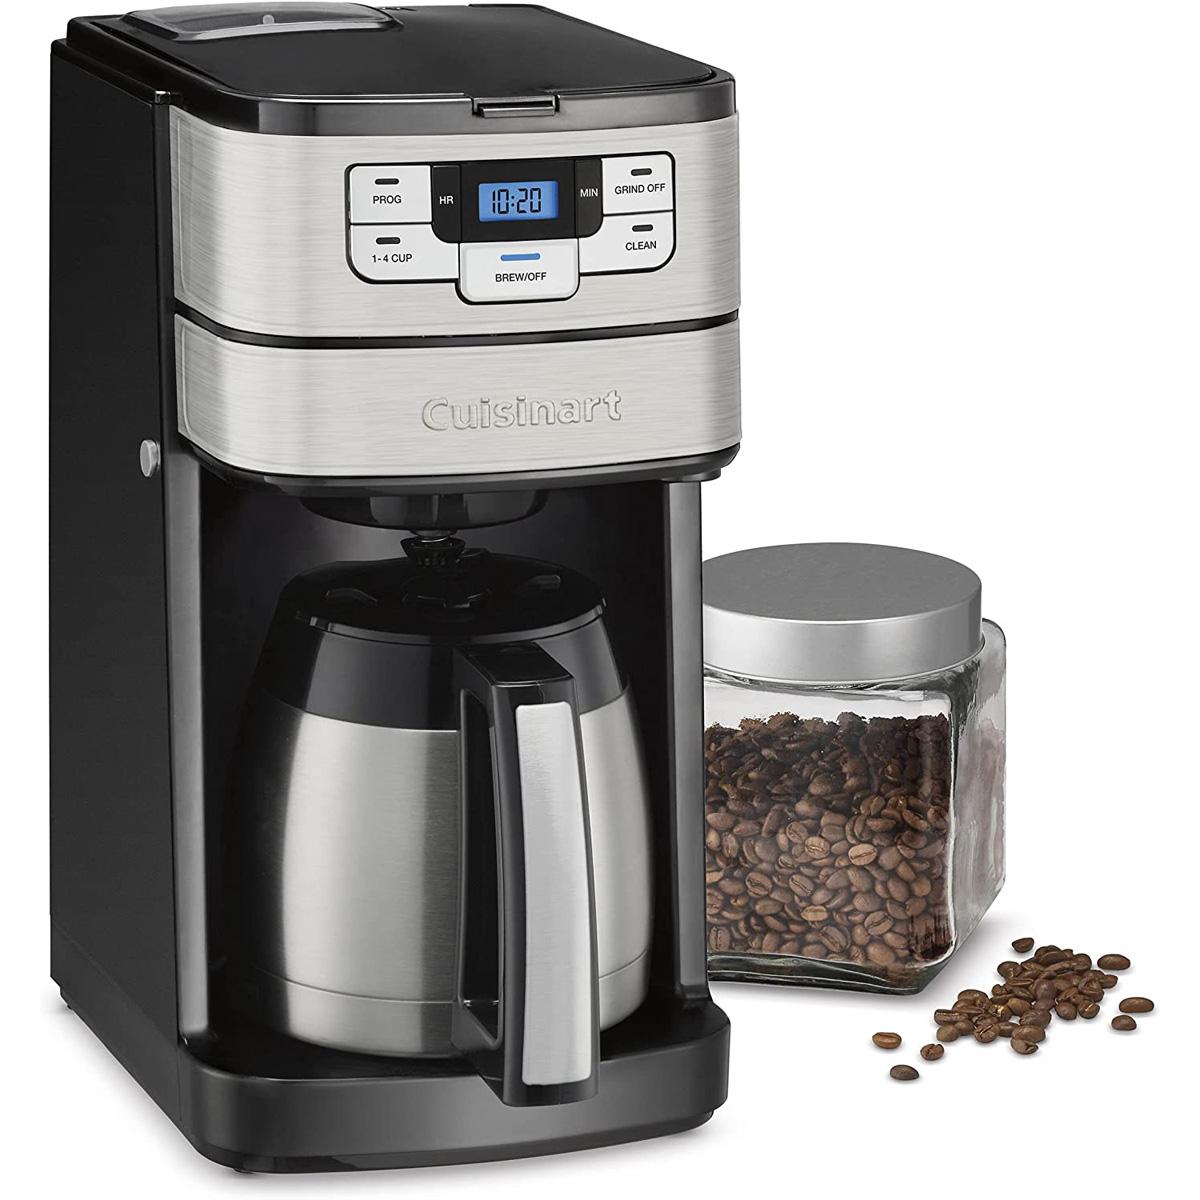 Cuisinart DGB-450 Automatic Grind Coffeemaker for $77.97 Shipped